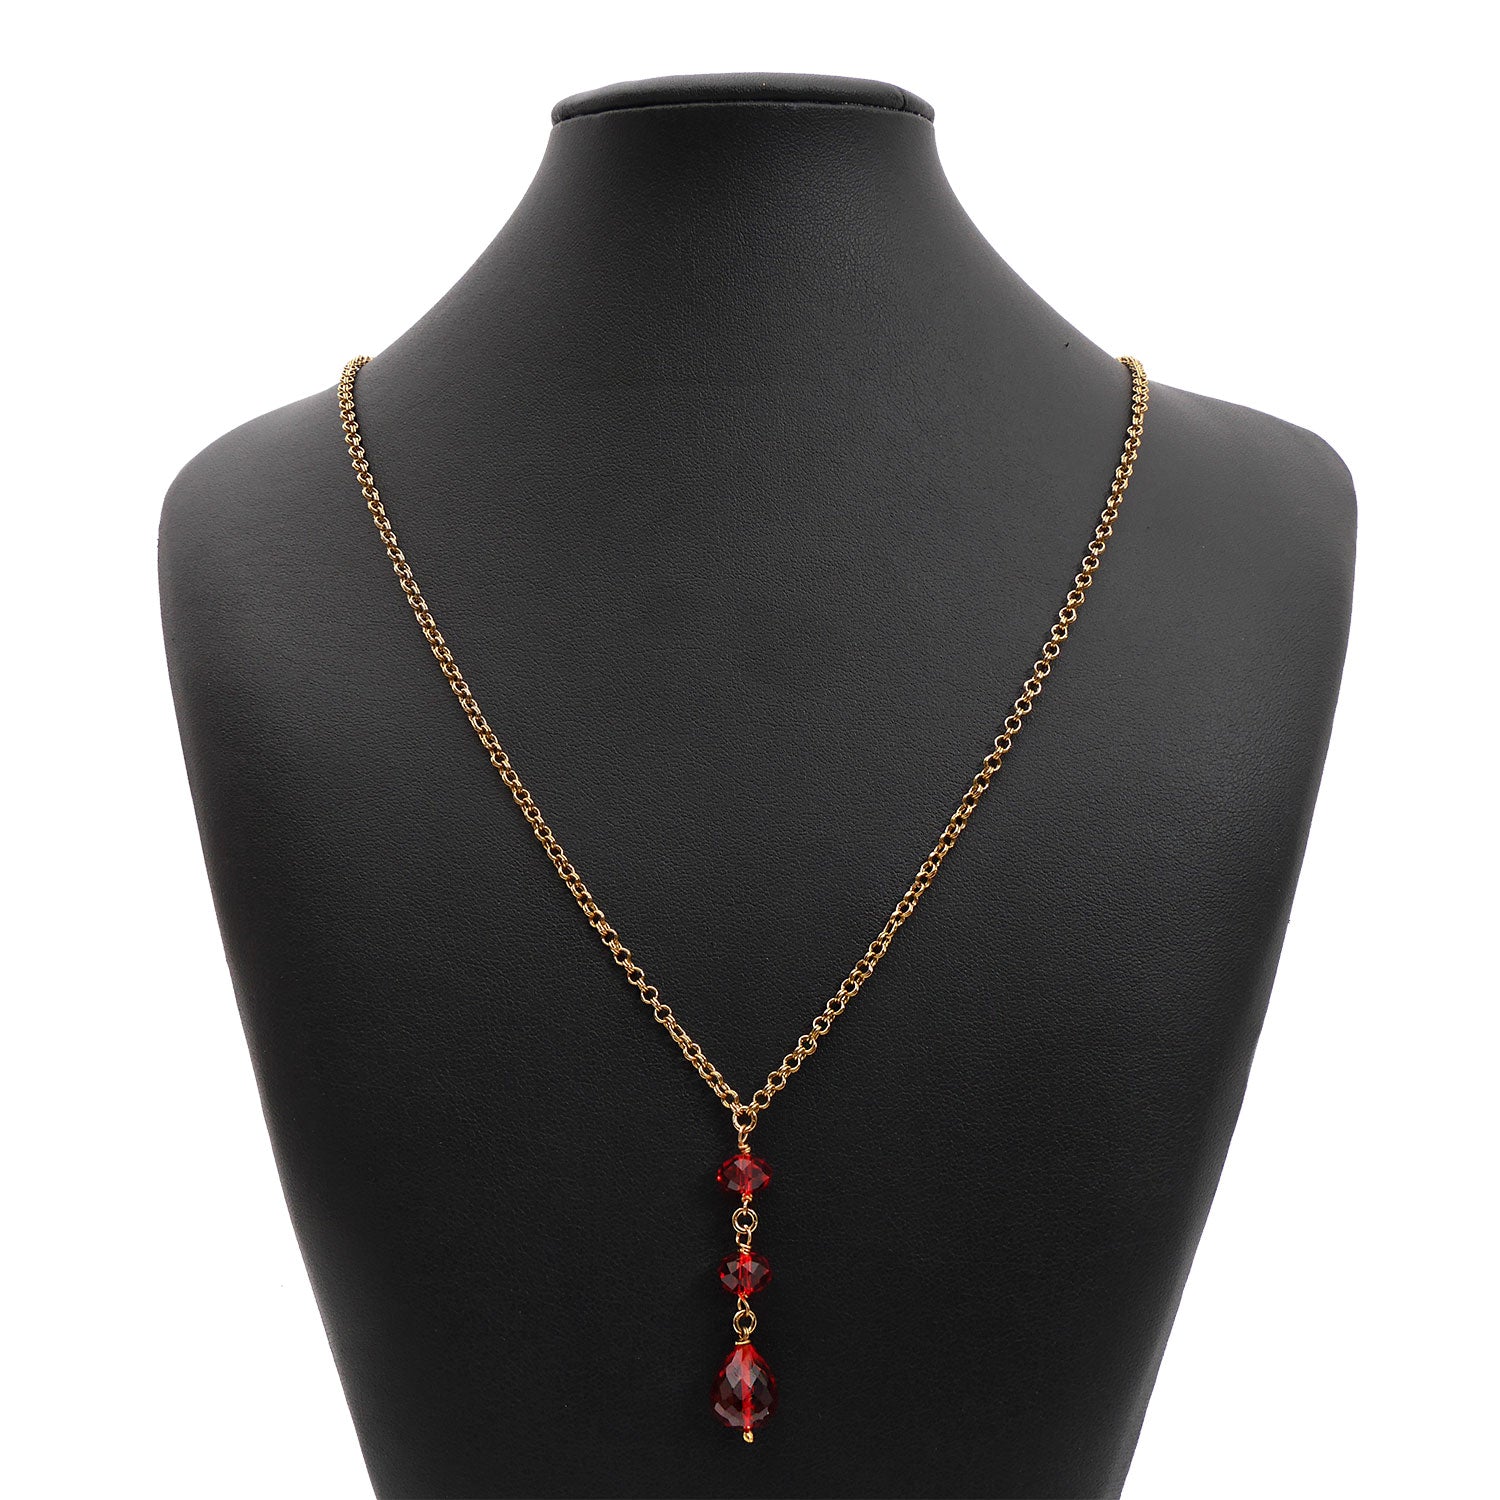 Red Crystal Necklace,red Quartz Necklace,raw Stone Necklace, Bohemian  Necklace,healing Crystal,long Layering Necklace,crystal - Necklace -  AliExpress